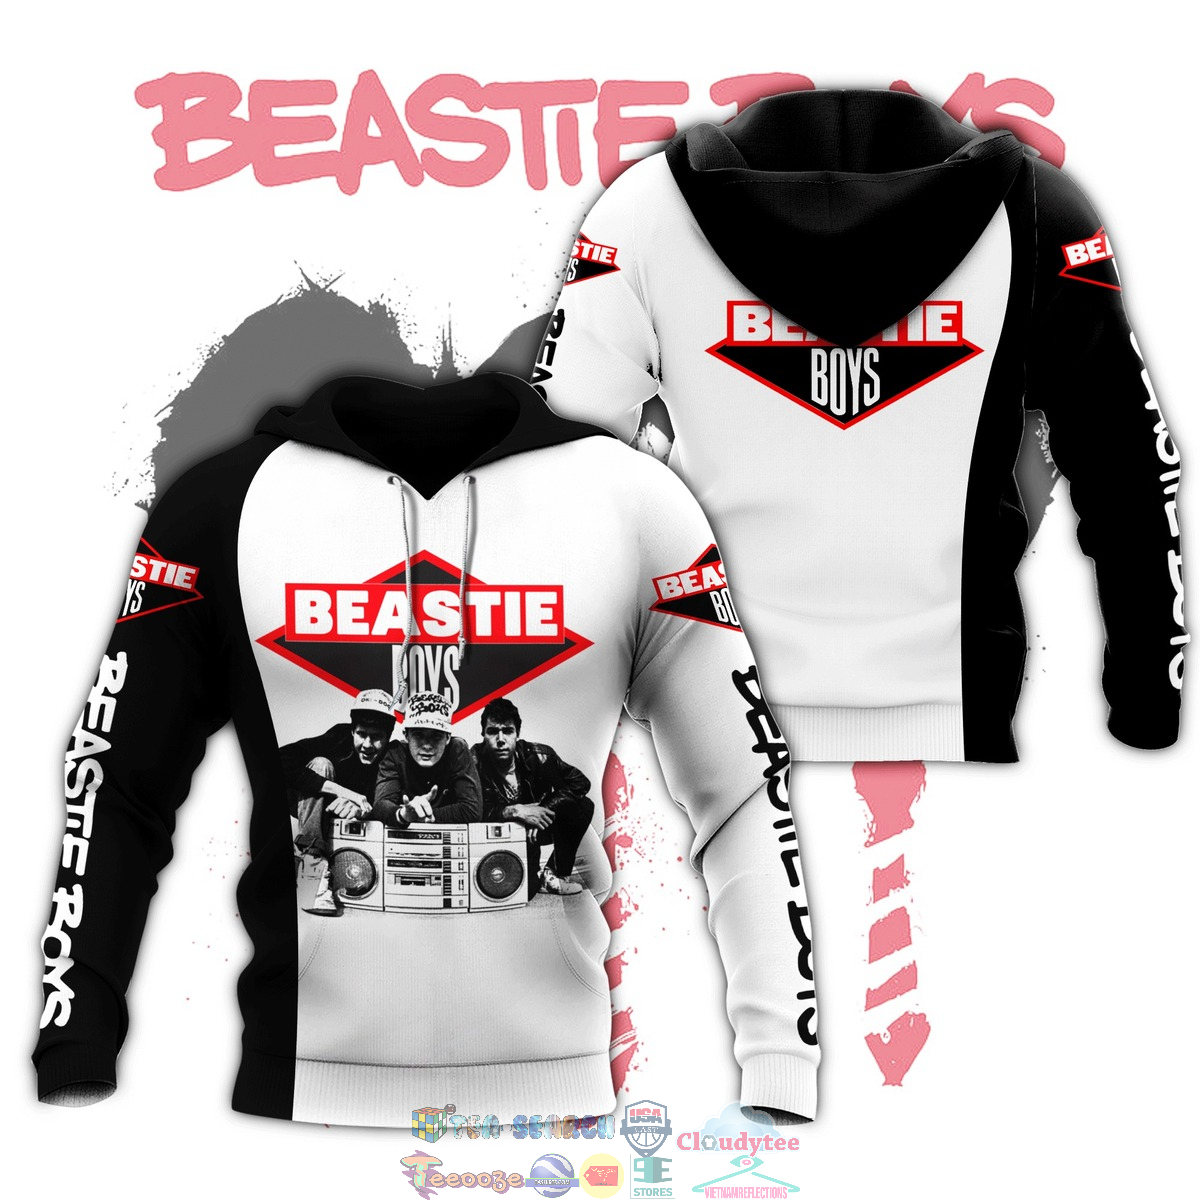 Beastie Boys Band ver 1 3D hoodie and t-shirt